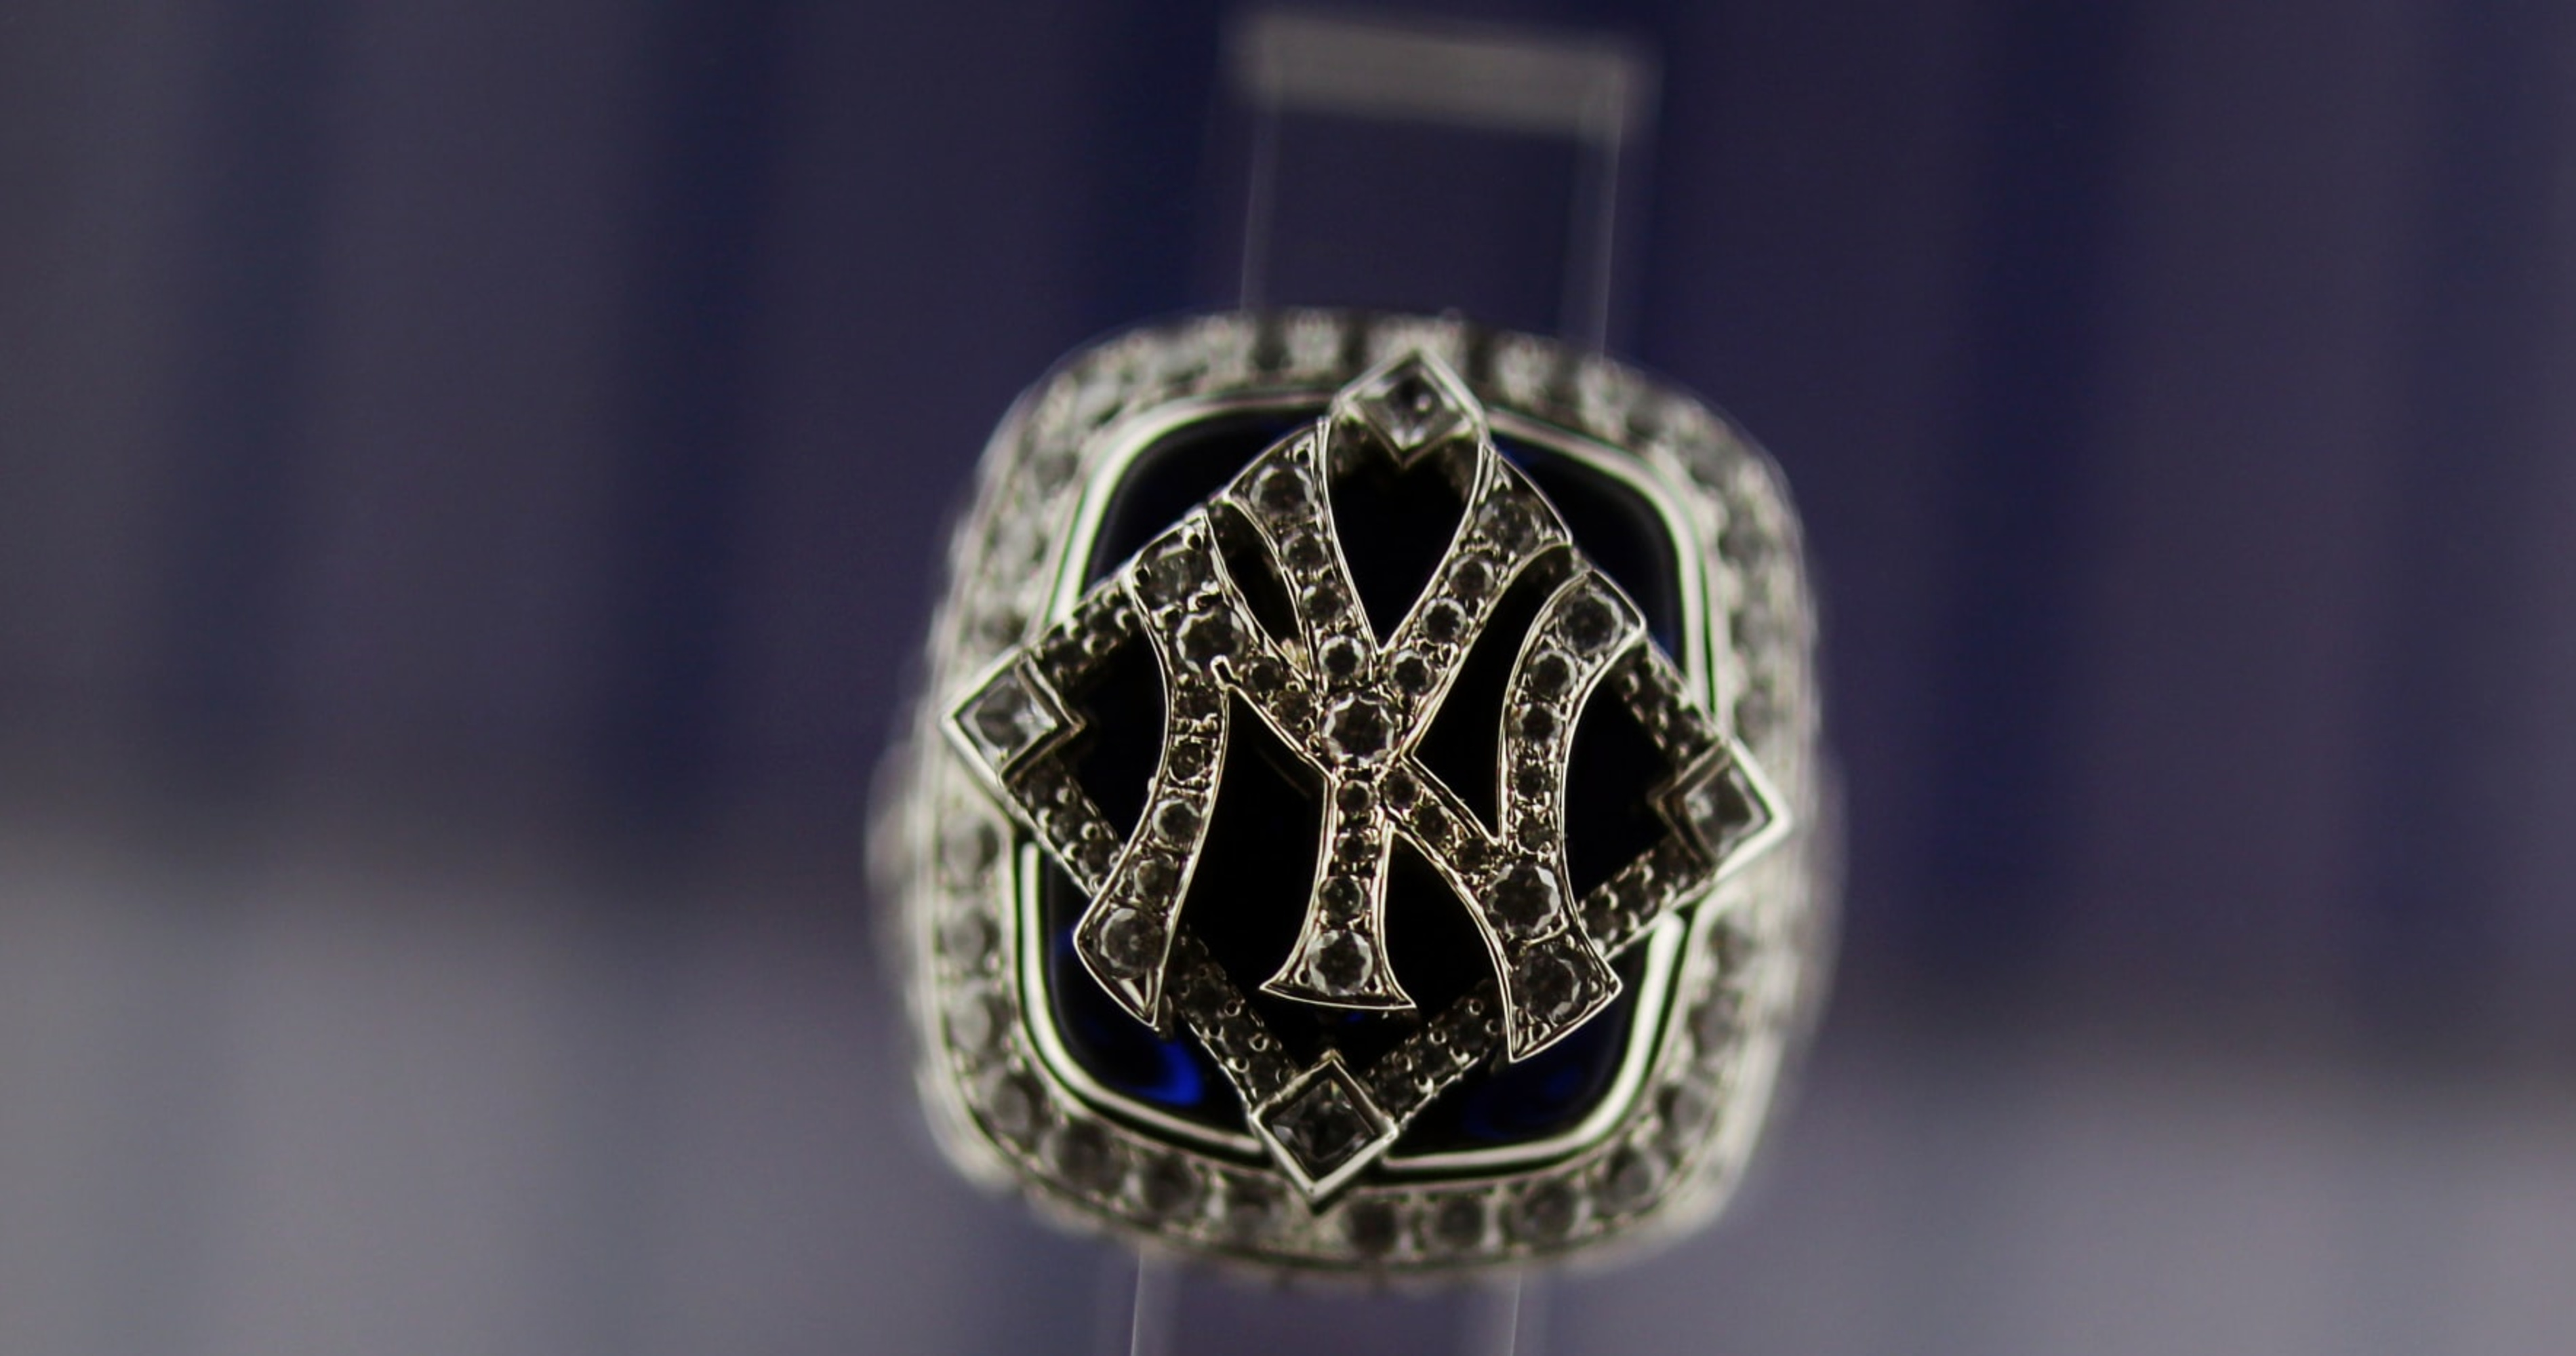 Arrests made in thefts of Yogi Berra's World Series rings, Warhol